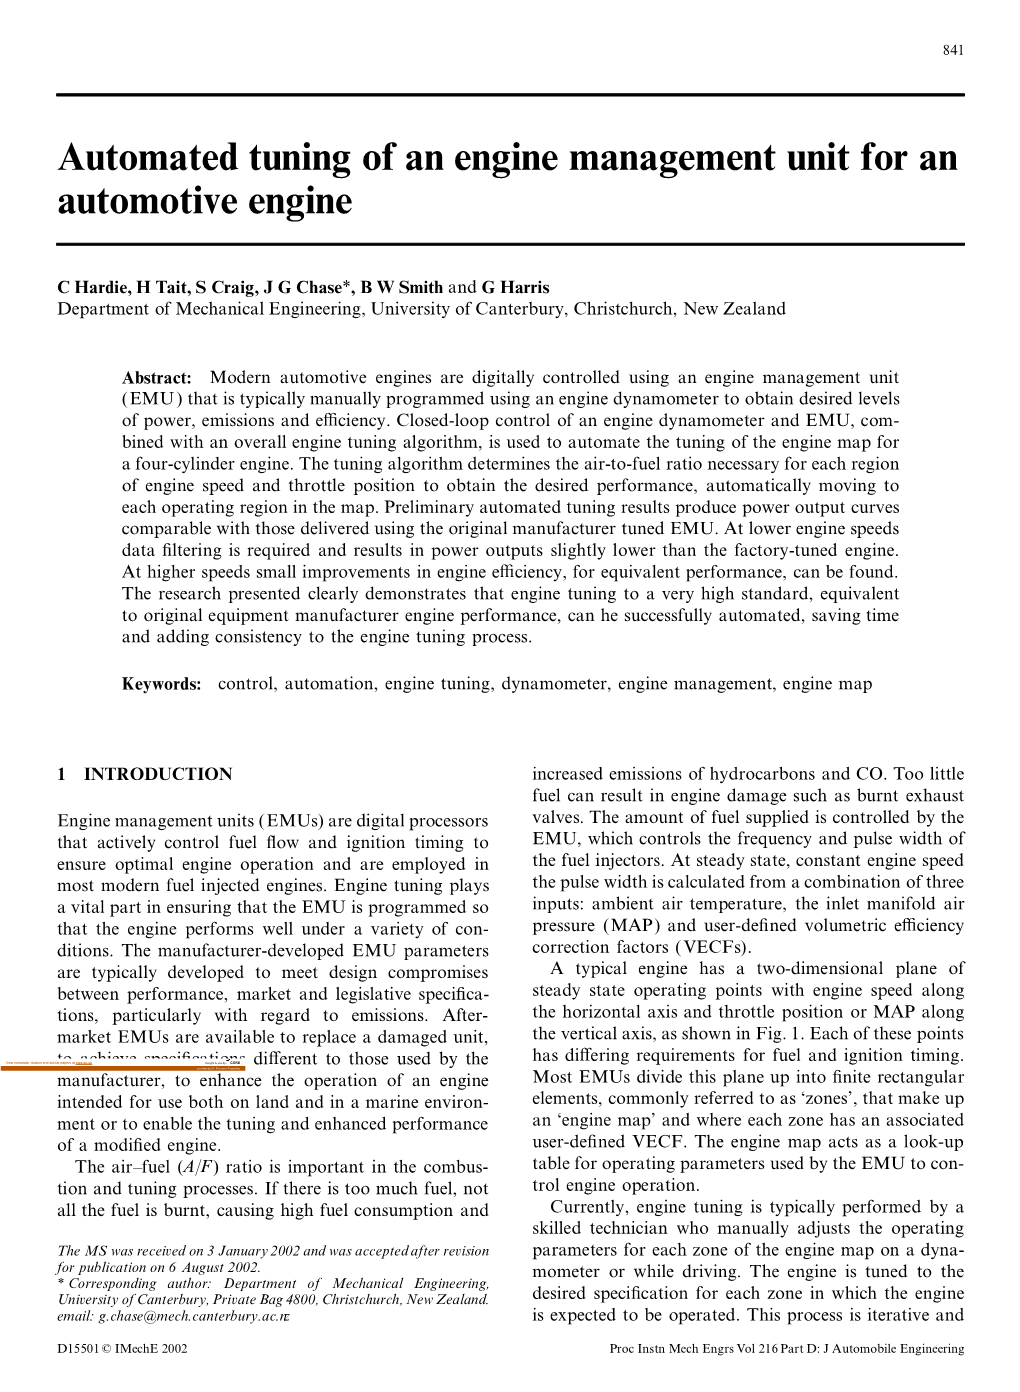 Automated Tuning of an Engine Management Unit for an Automotive Engine